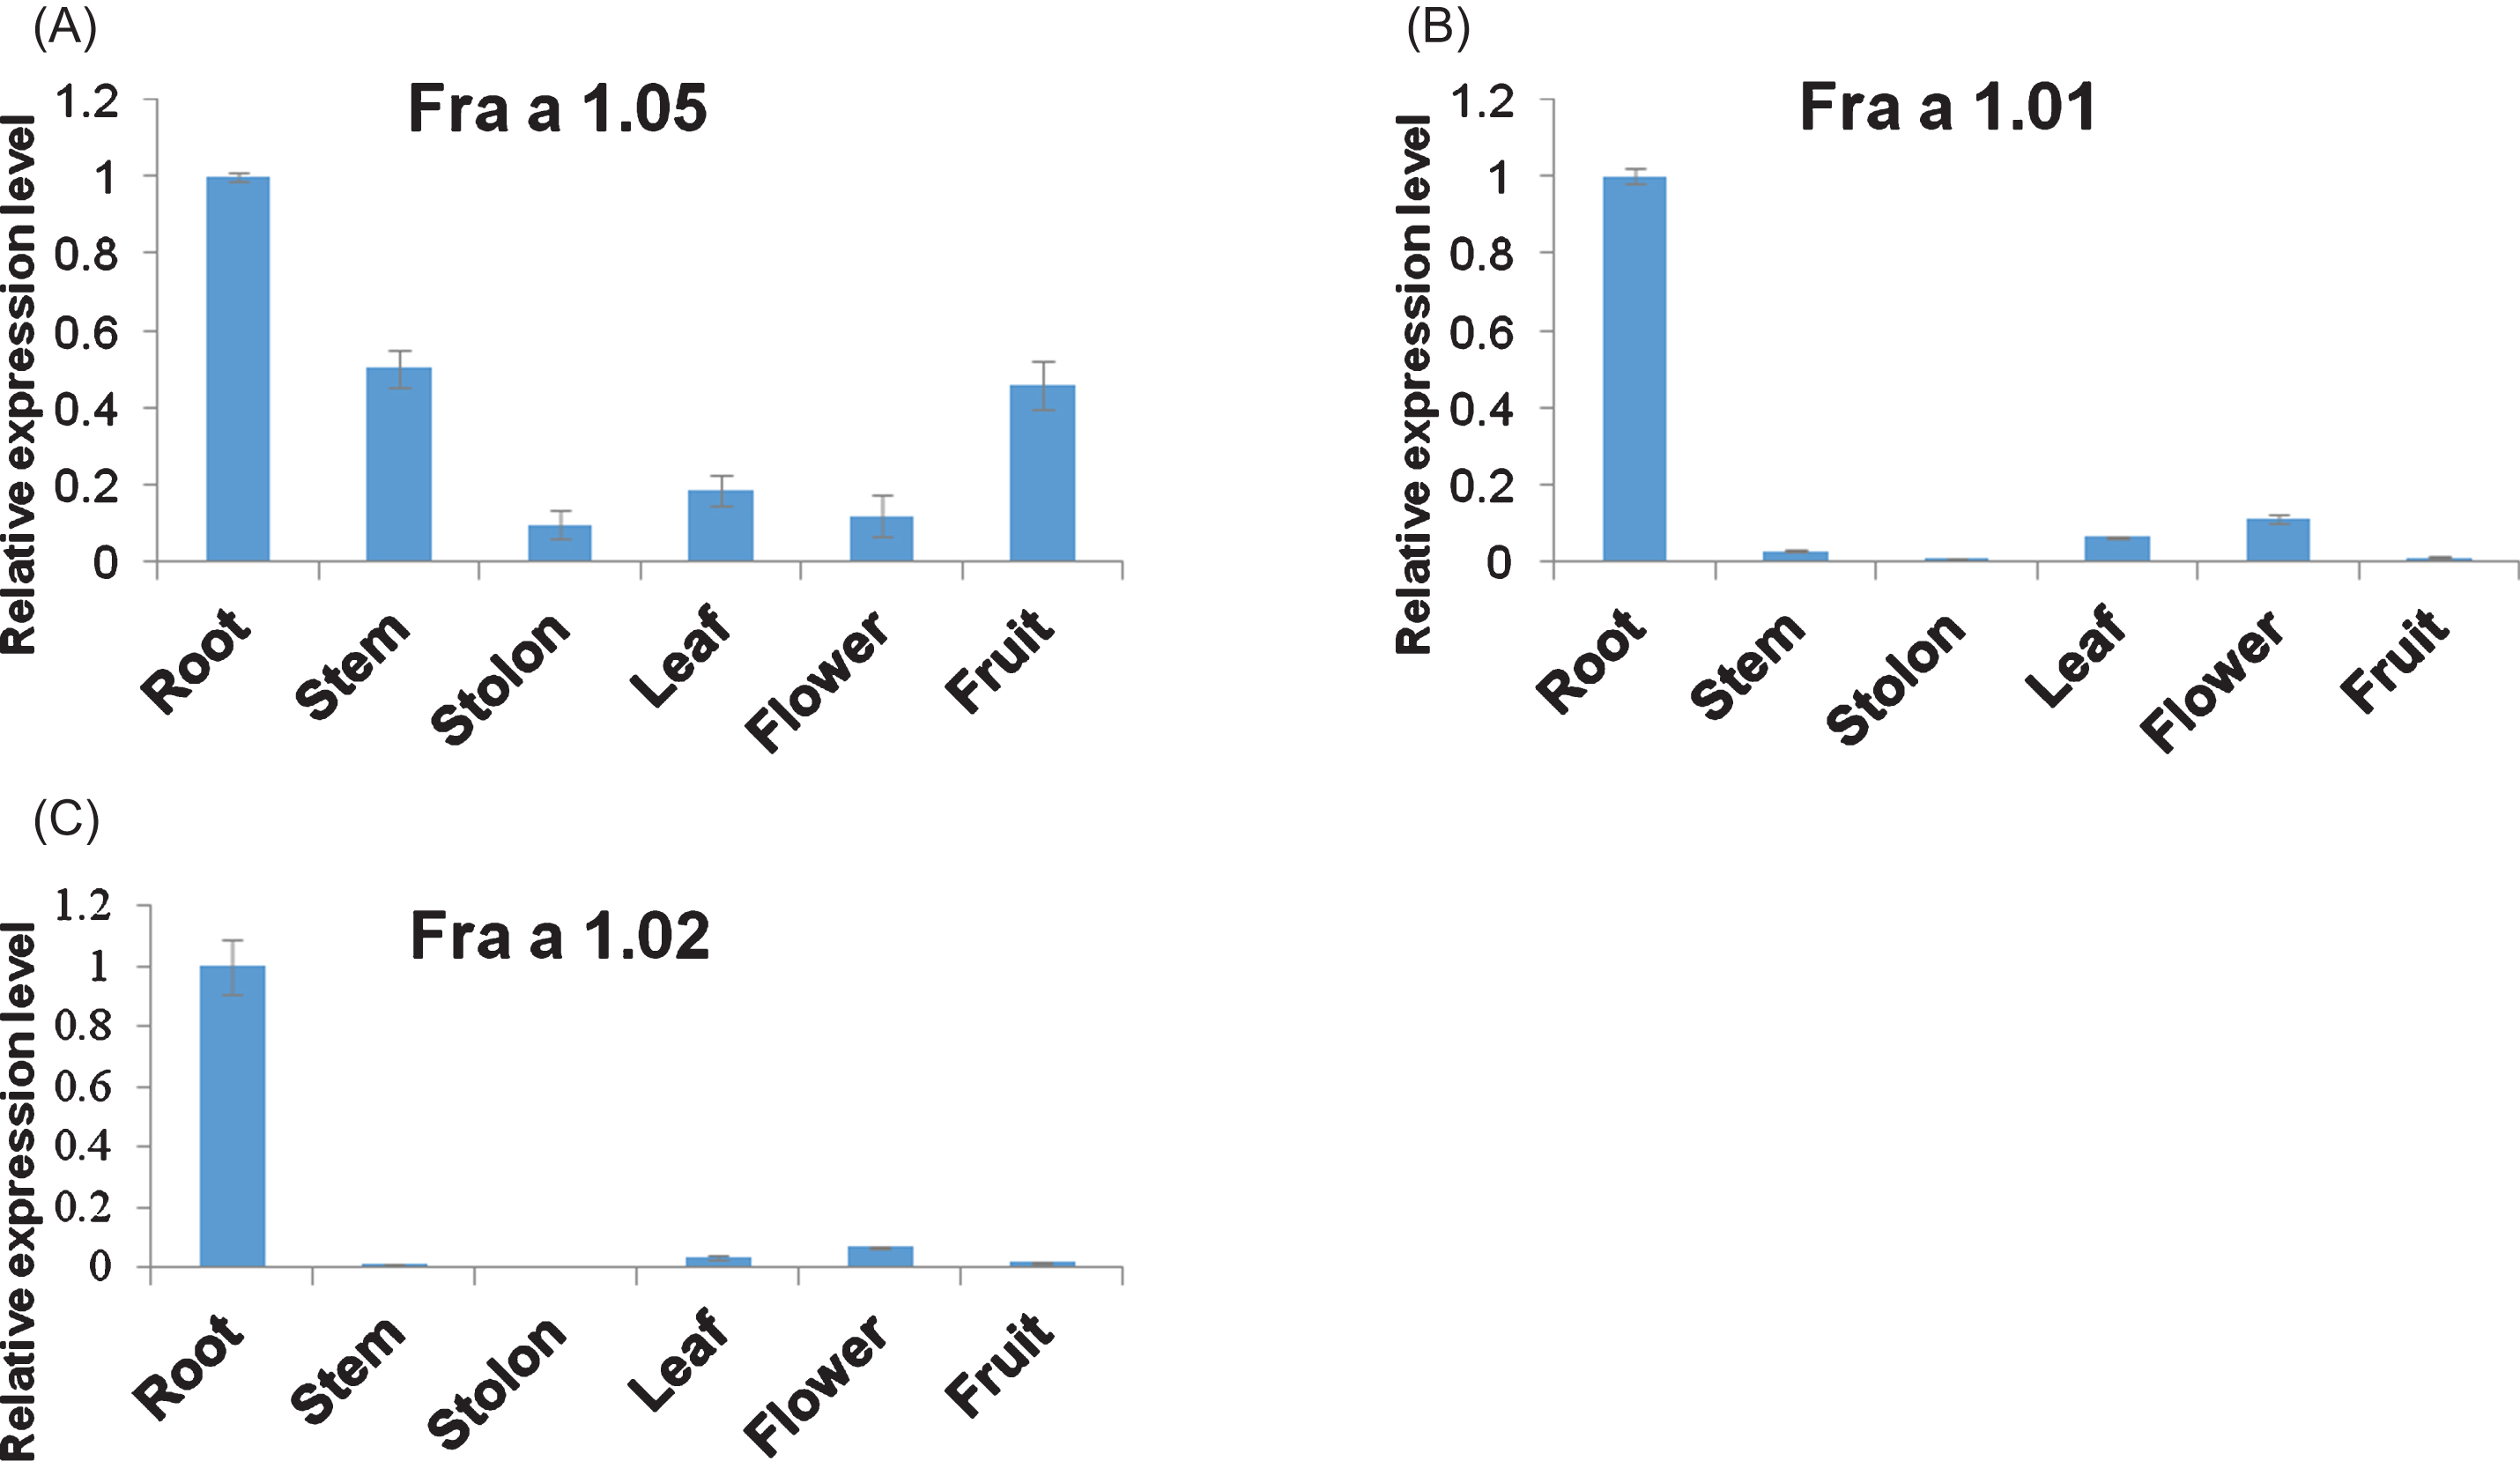 Spatial expression analysis of Fra a 1.05, Fra a 1.01, and Fra a 1.02 genes in strawberry. mRNA levels of Fra a 1.05 (A), Fra a 1.01 (B), and Fra a 1.02 (C) in six tissues were measured by qRT-PCR. Expression values in the root tissue were set as 1. Data were shown as mean±standard deviation derived from three biological and three technical replicates.